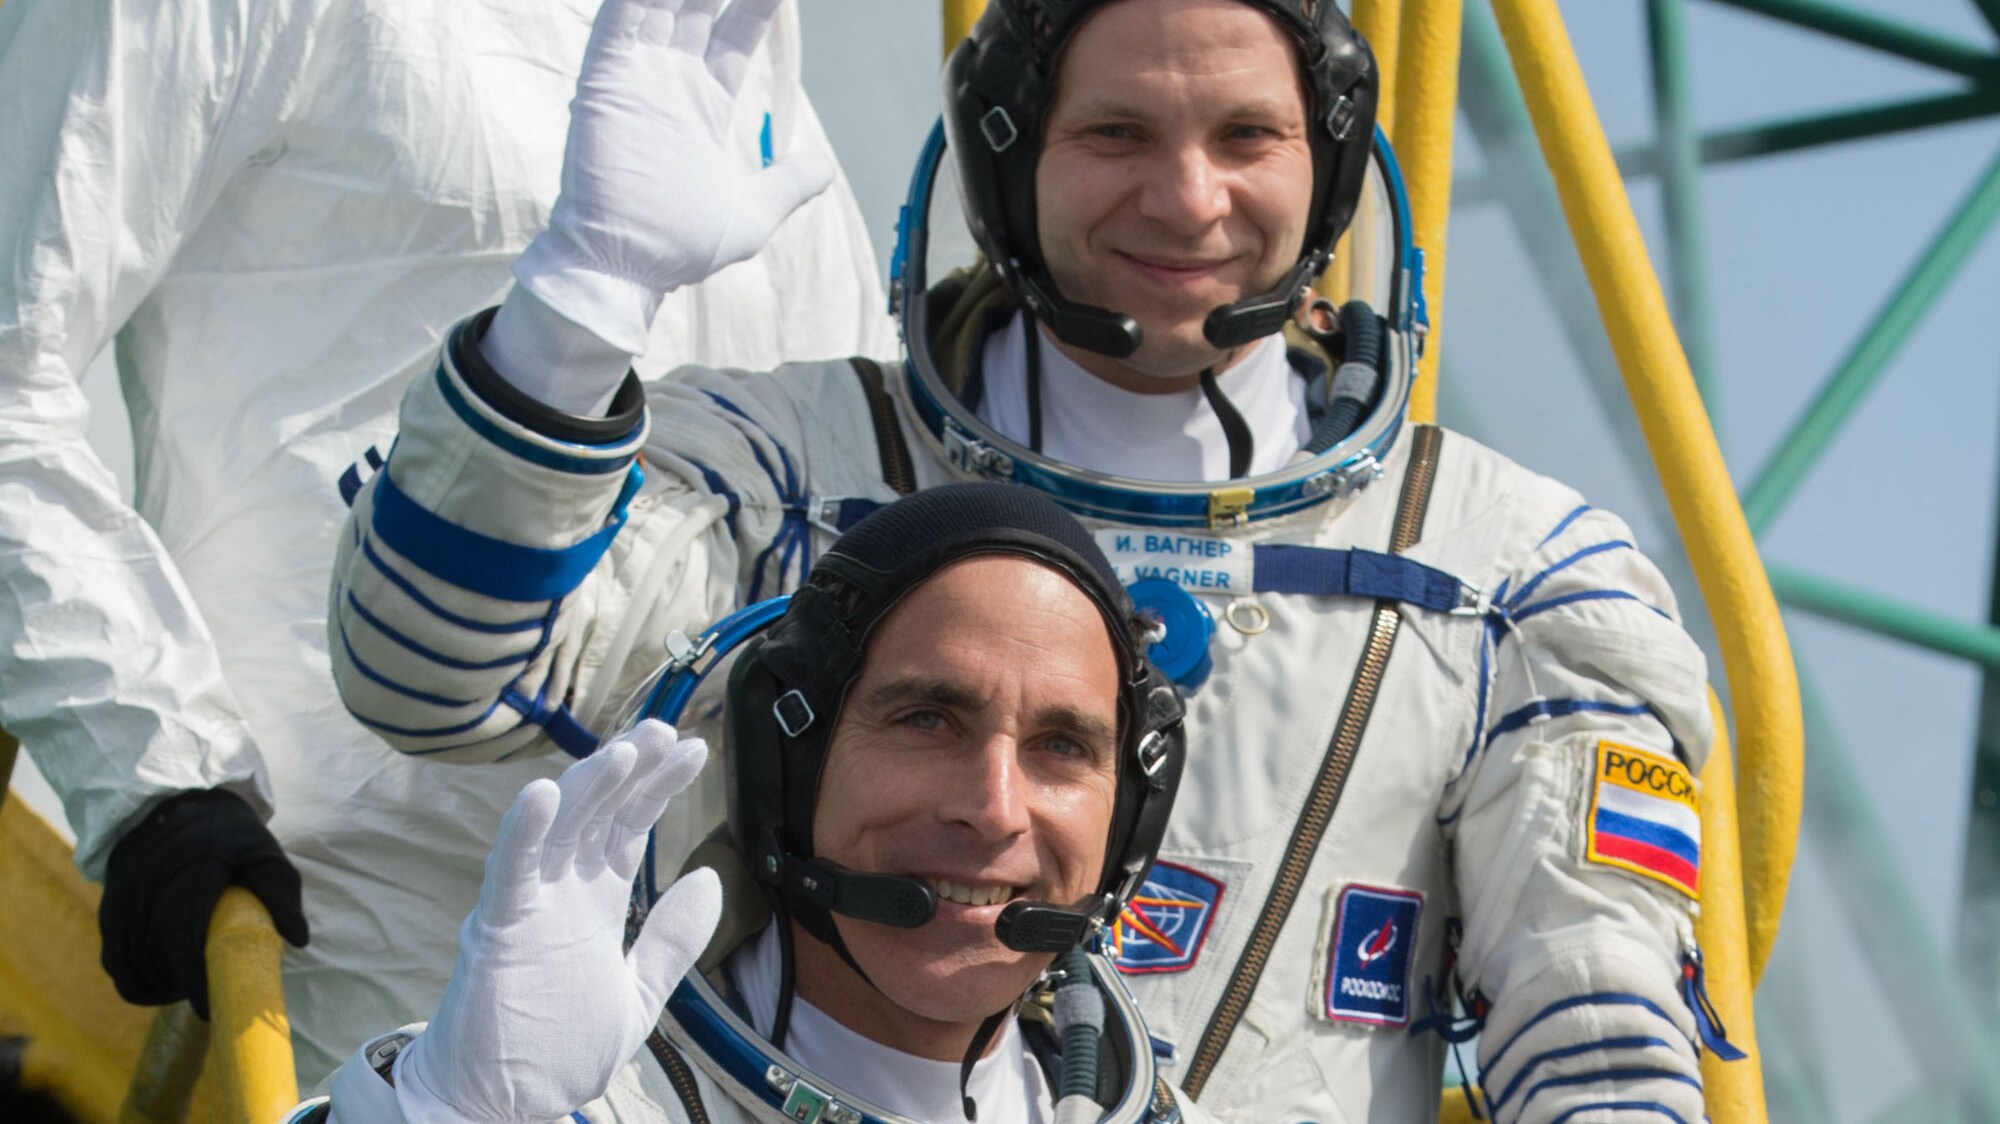 AMONG THE STARS - Expedition 63 crewmembers Ivan Vagner of Roscosmos, top, Chris Cassidy of NASA, center, and Anatoly Ivanishin wave goodbye as they prepare to climb aboard the Soyuz MS-16 rocket at Site 31 at the Baikonur Cosmodrome in Kazakhstan, Thursday, April 9, 2020. They launched a short time later to the International Space Station for the start of a six-and-a-half month mission. (NASA/GCTC/Andrey Shelepin) IVAN VAGNER, CHRIS CASSIDY, ANATOLY IVANISHIN